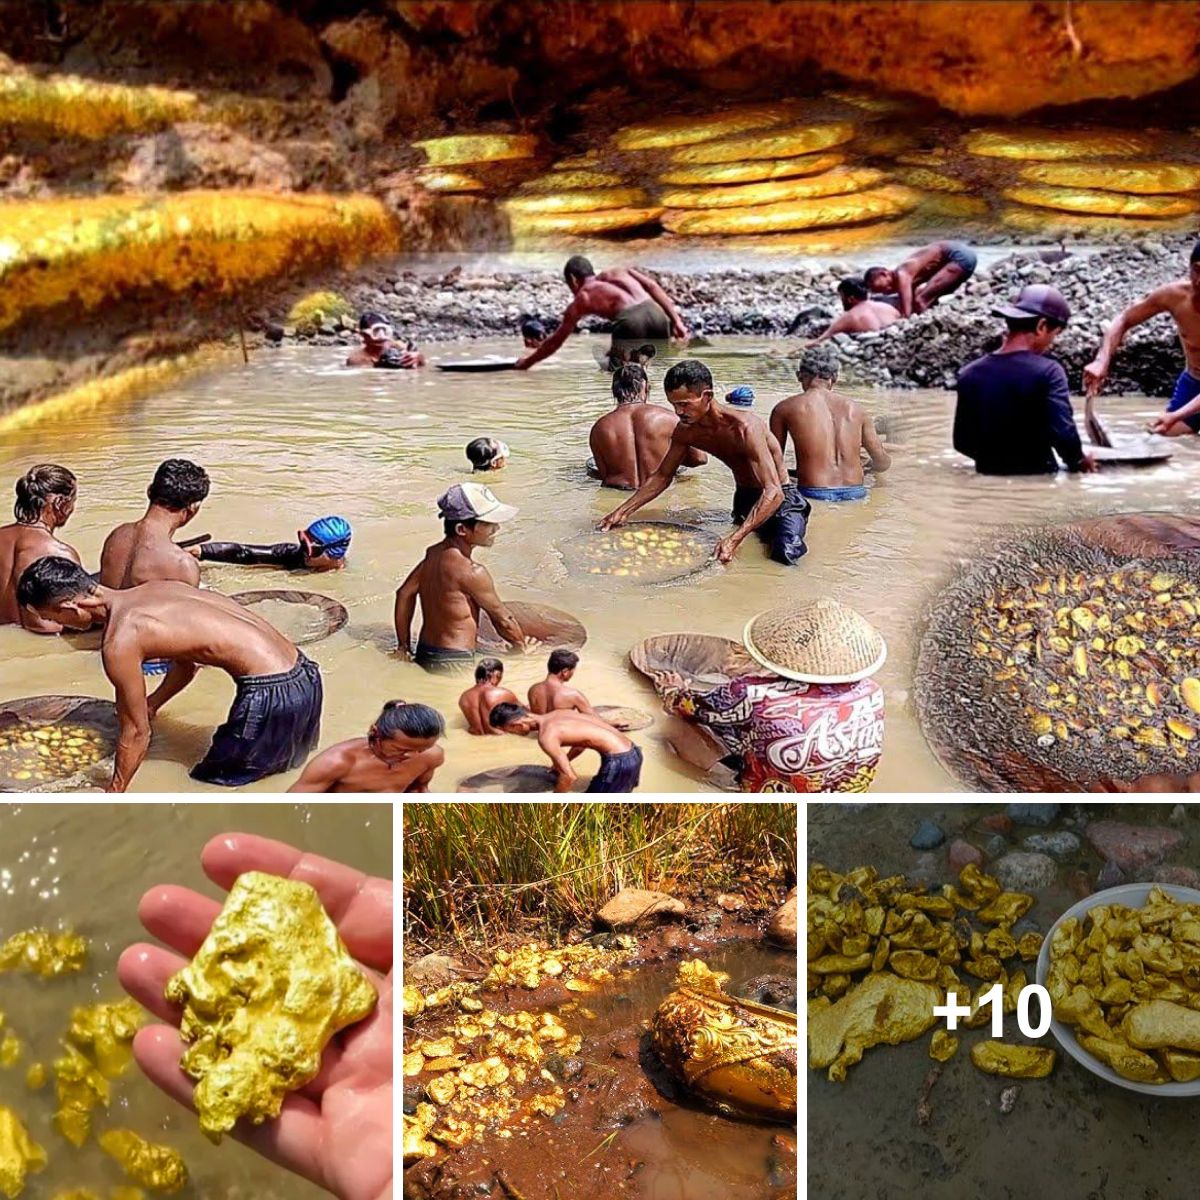 Revealing the truth about the Forgotten River of Gold from history: The indigenous people here have indeed turned their lives around through diligent gold prospecting in this area!